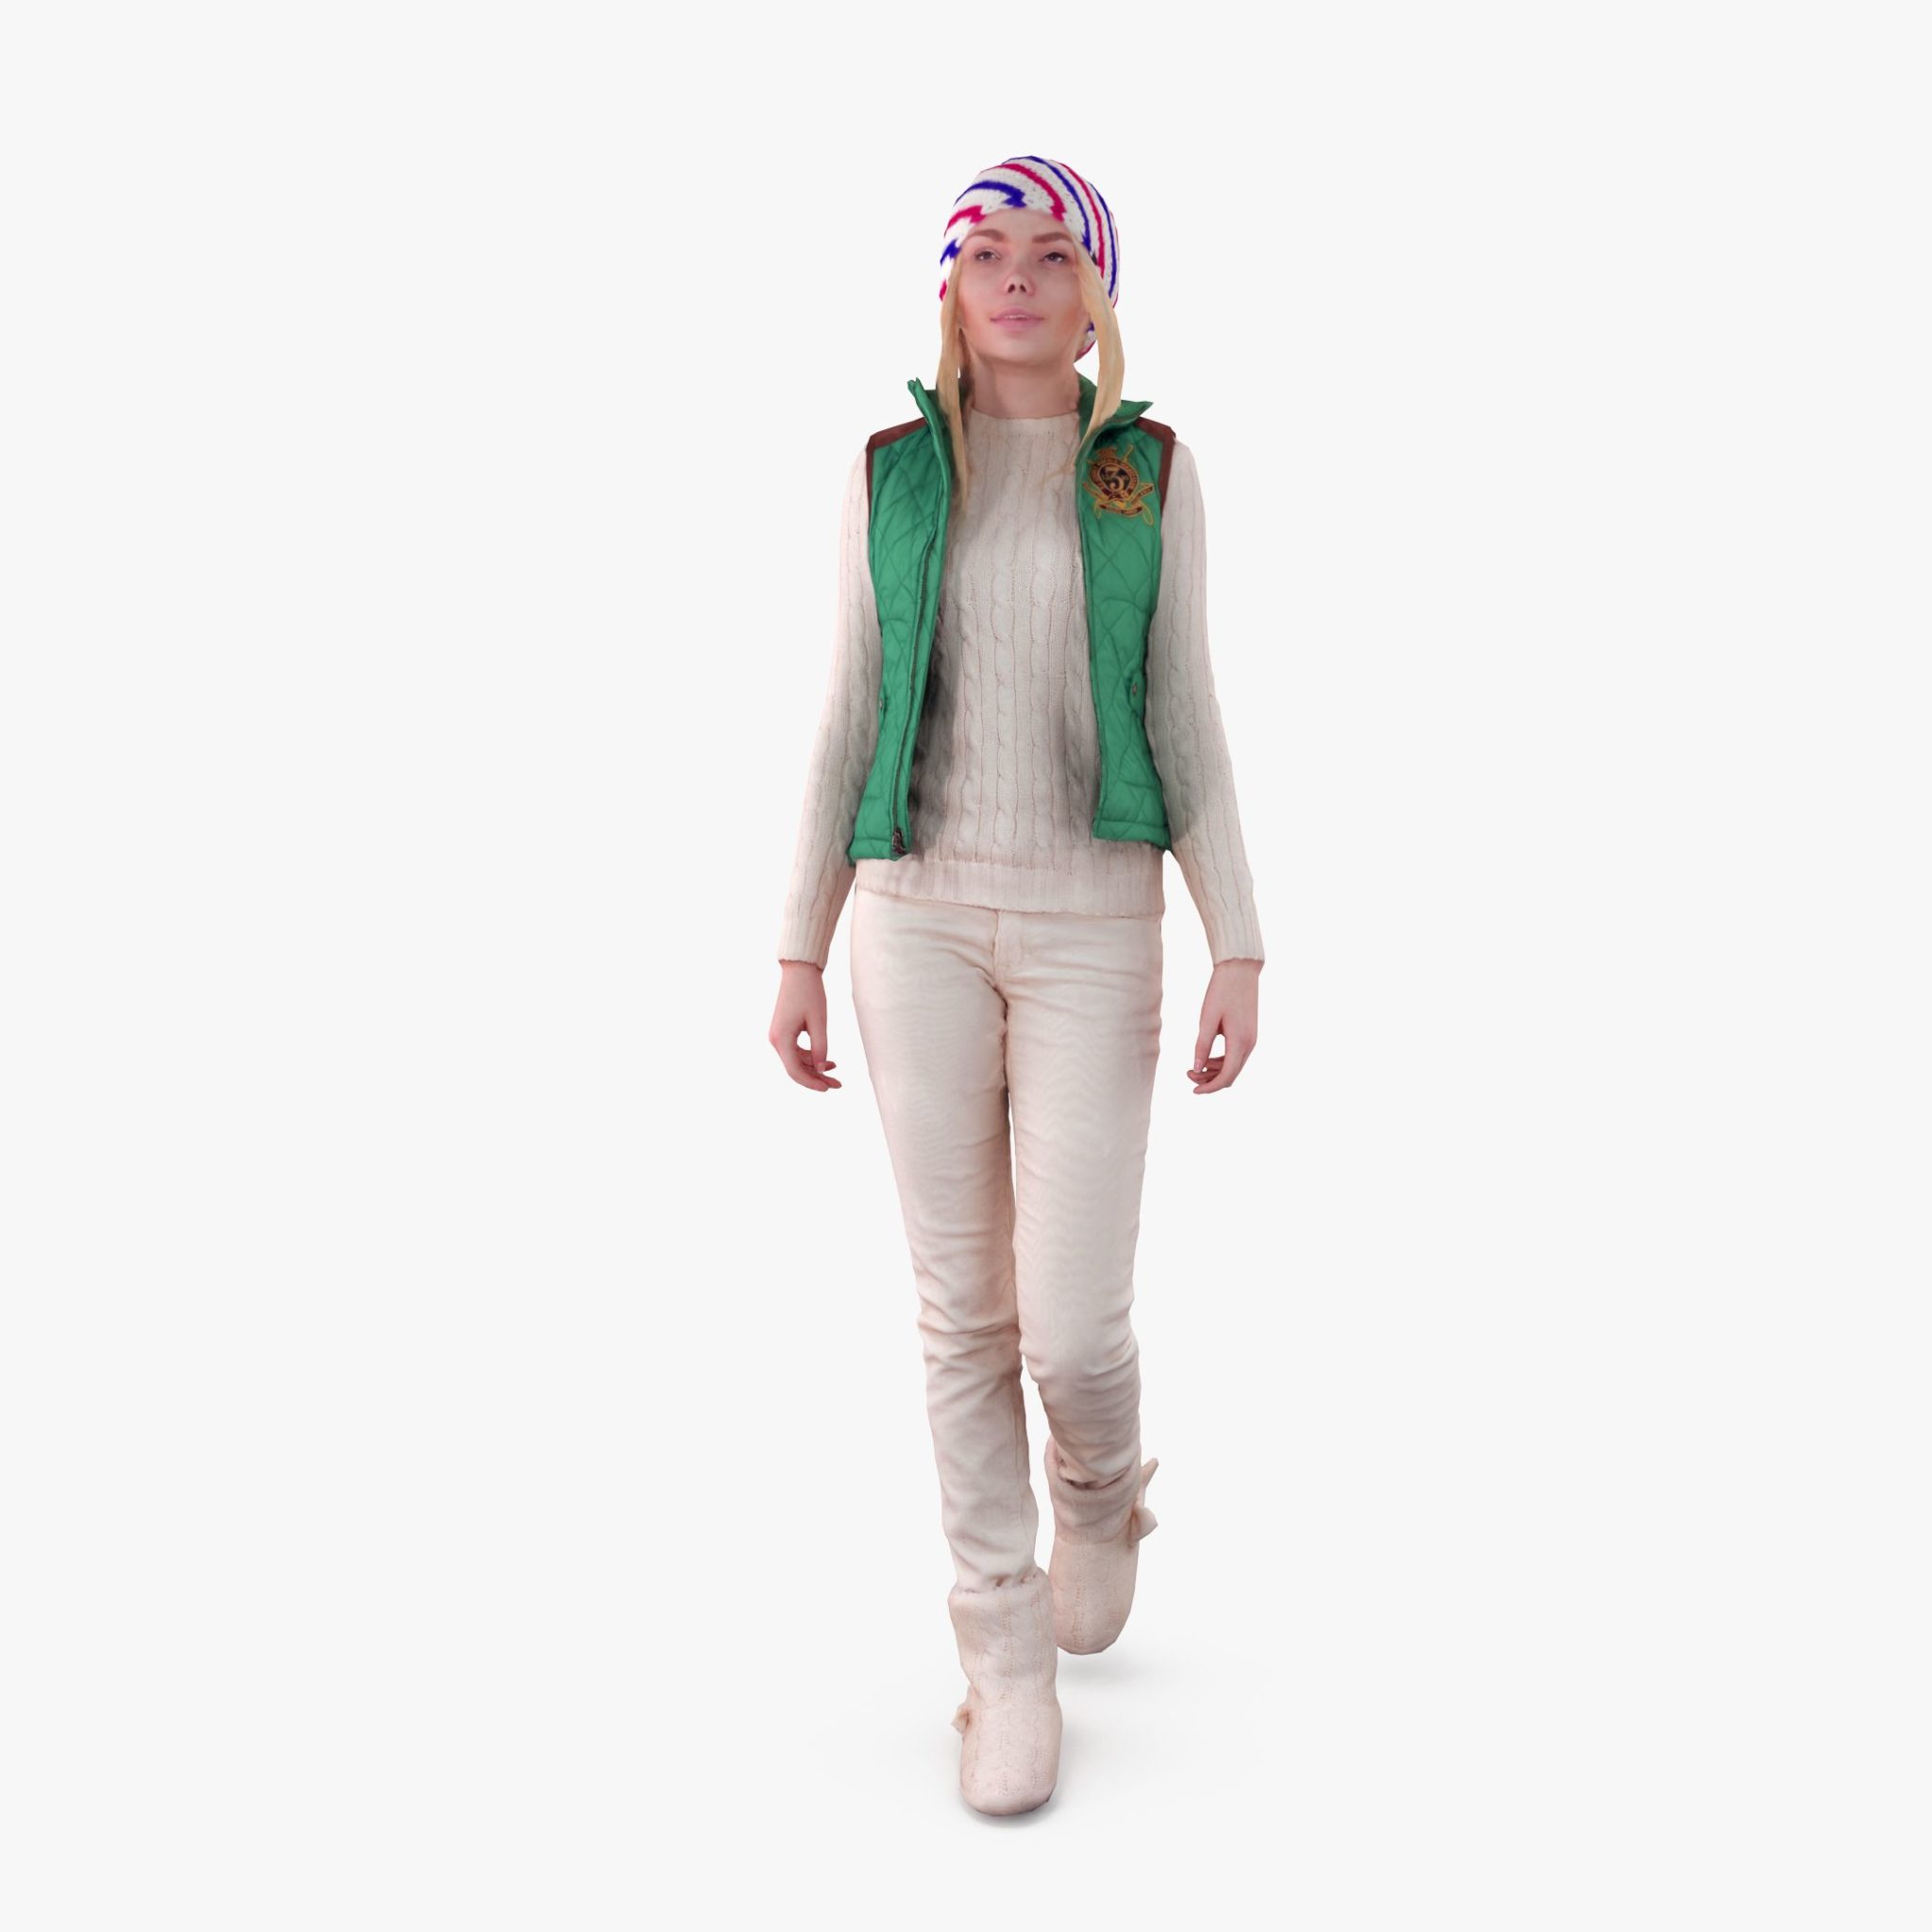 Young City Girl 3D Model | 3DTree Scanning Studio